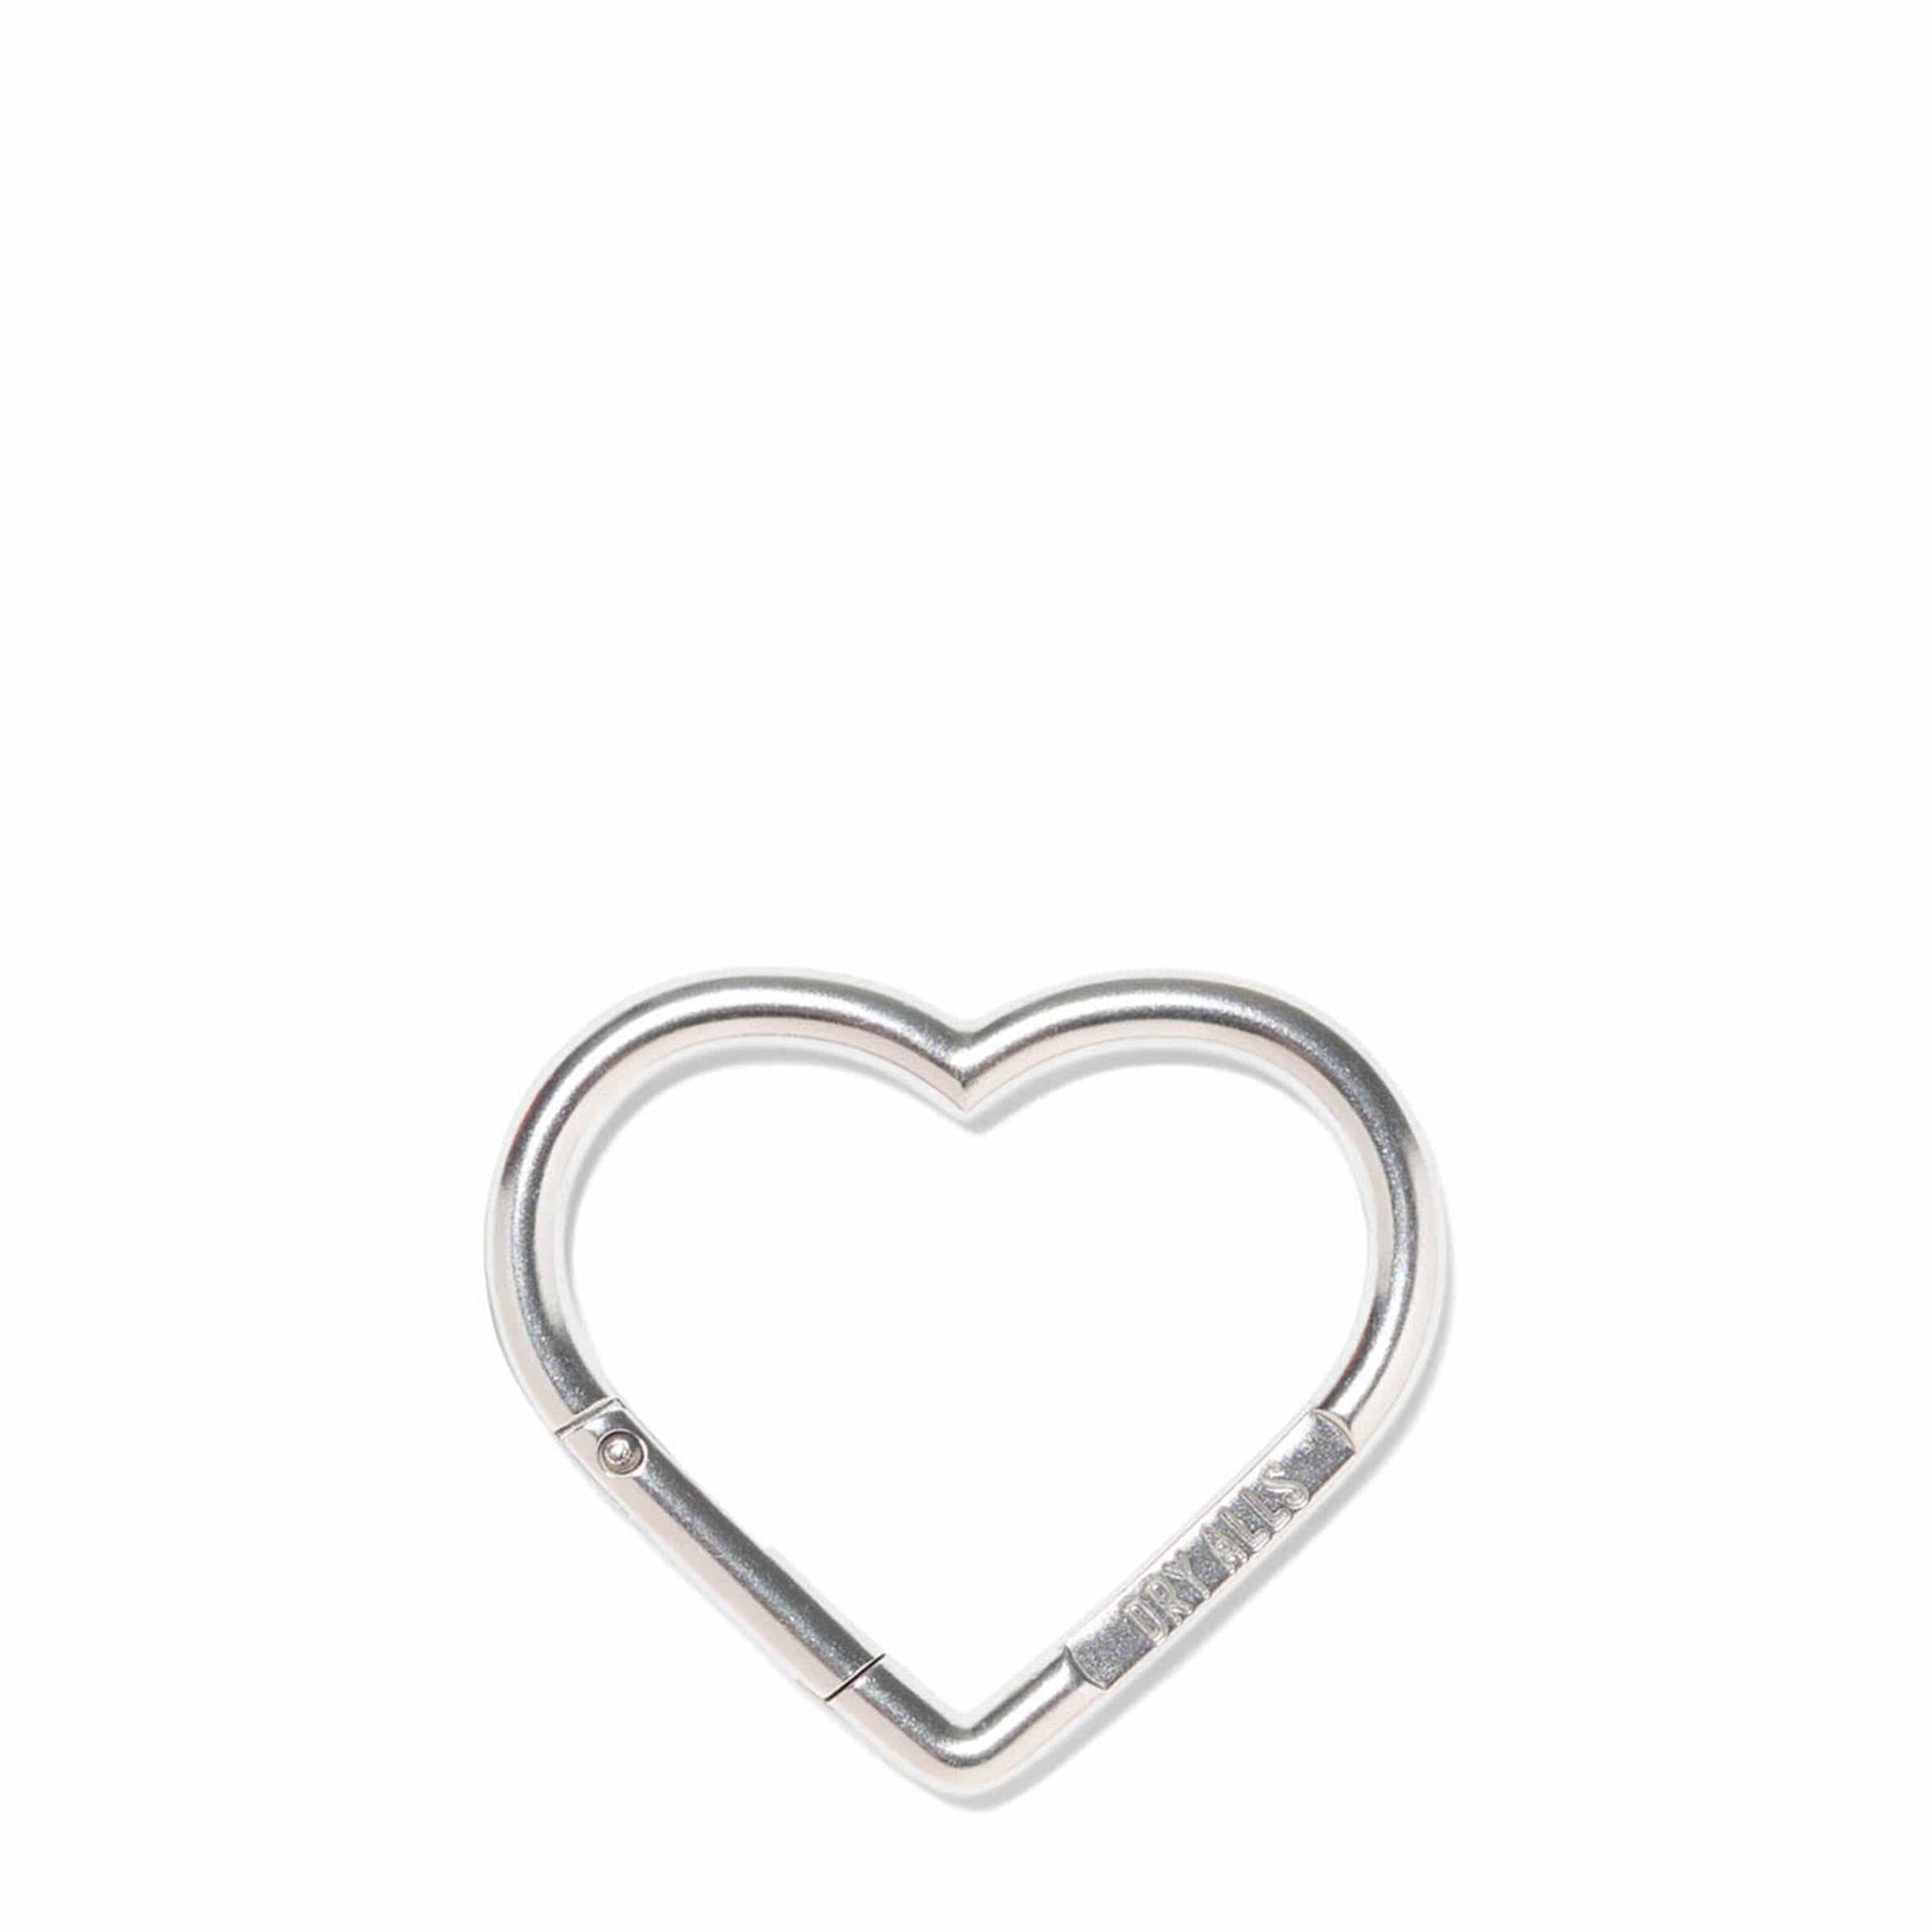 Human Made Odds & Ends SILVER / O/S HEART CARABINER